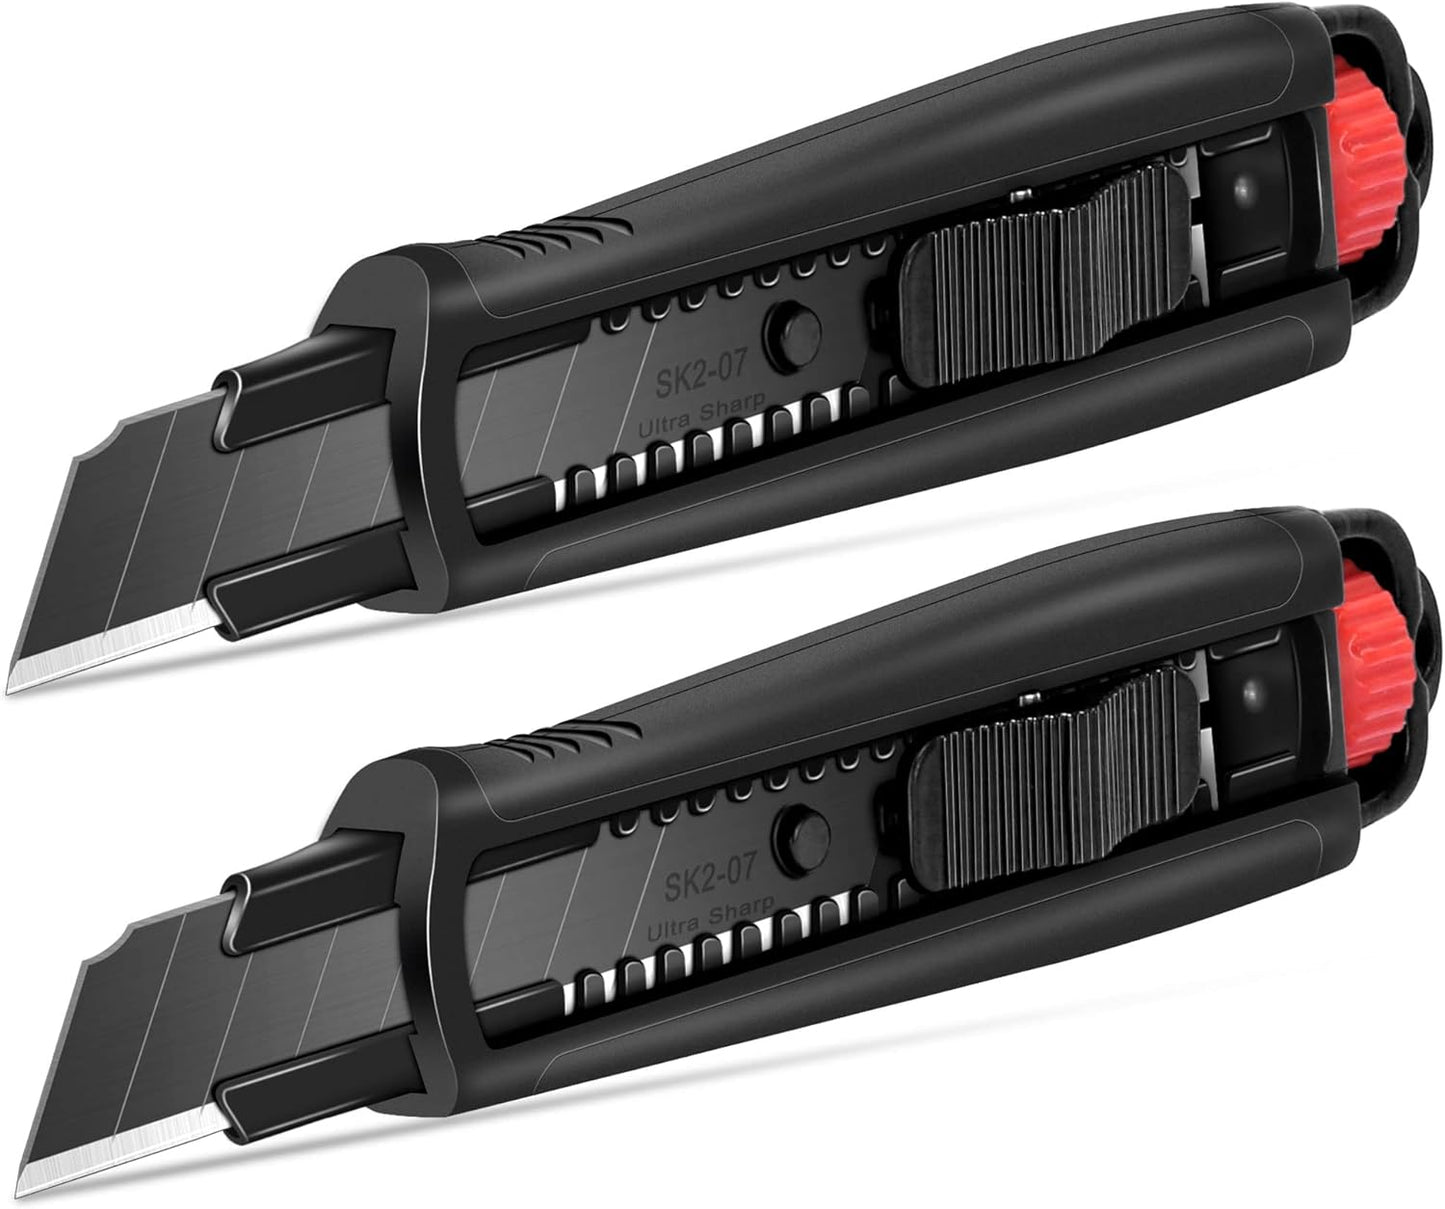 HAUTMEC 2PCS HAUTMEC 18mm Extra Heavy Duty Utility Knife with Double Lock Mechanism, Auto-Lock and Ratchet- Lock for Double Safety, SK2 Sharp Black Blade for Industrial or Construction Applications HT0136-2PC